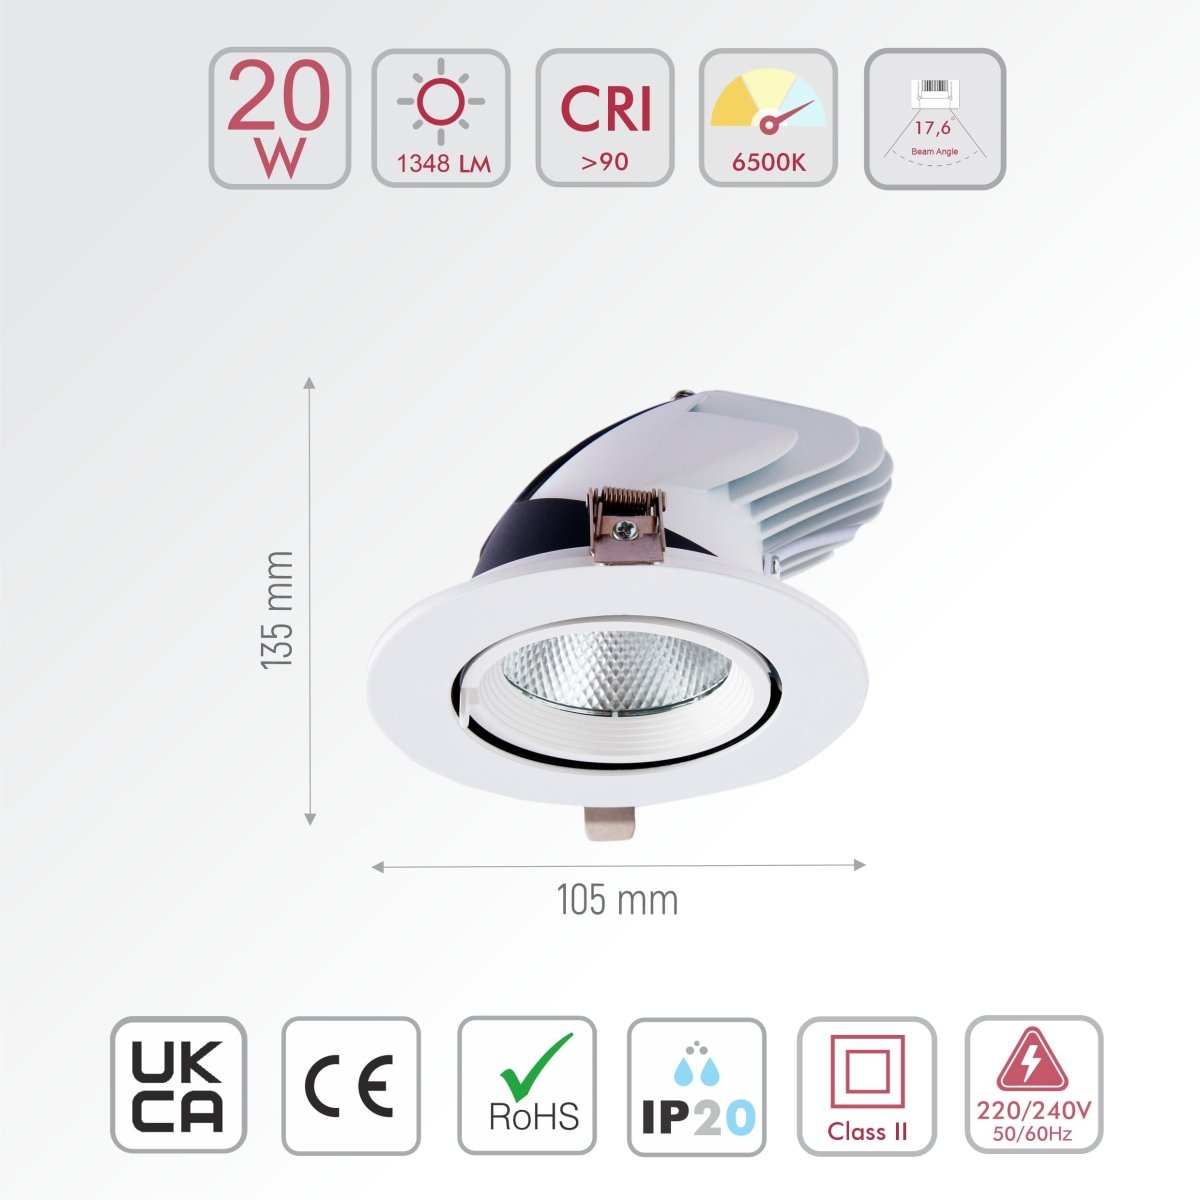 Size and specs of LED Accent Performance Swivel and Scoop Downlight 10W 20W 30W Warm White Cool White Cool Daylight CRI90 White | TEKLED 20w daylight